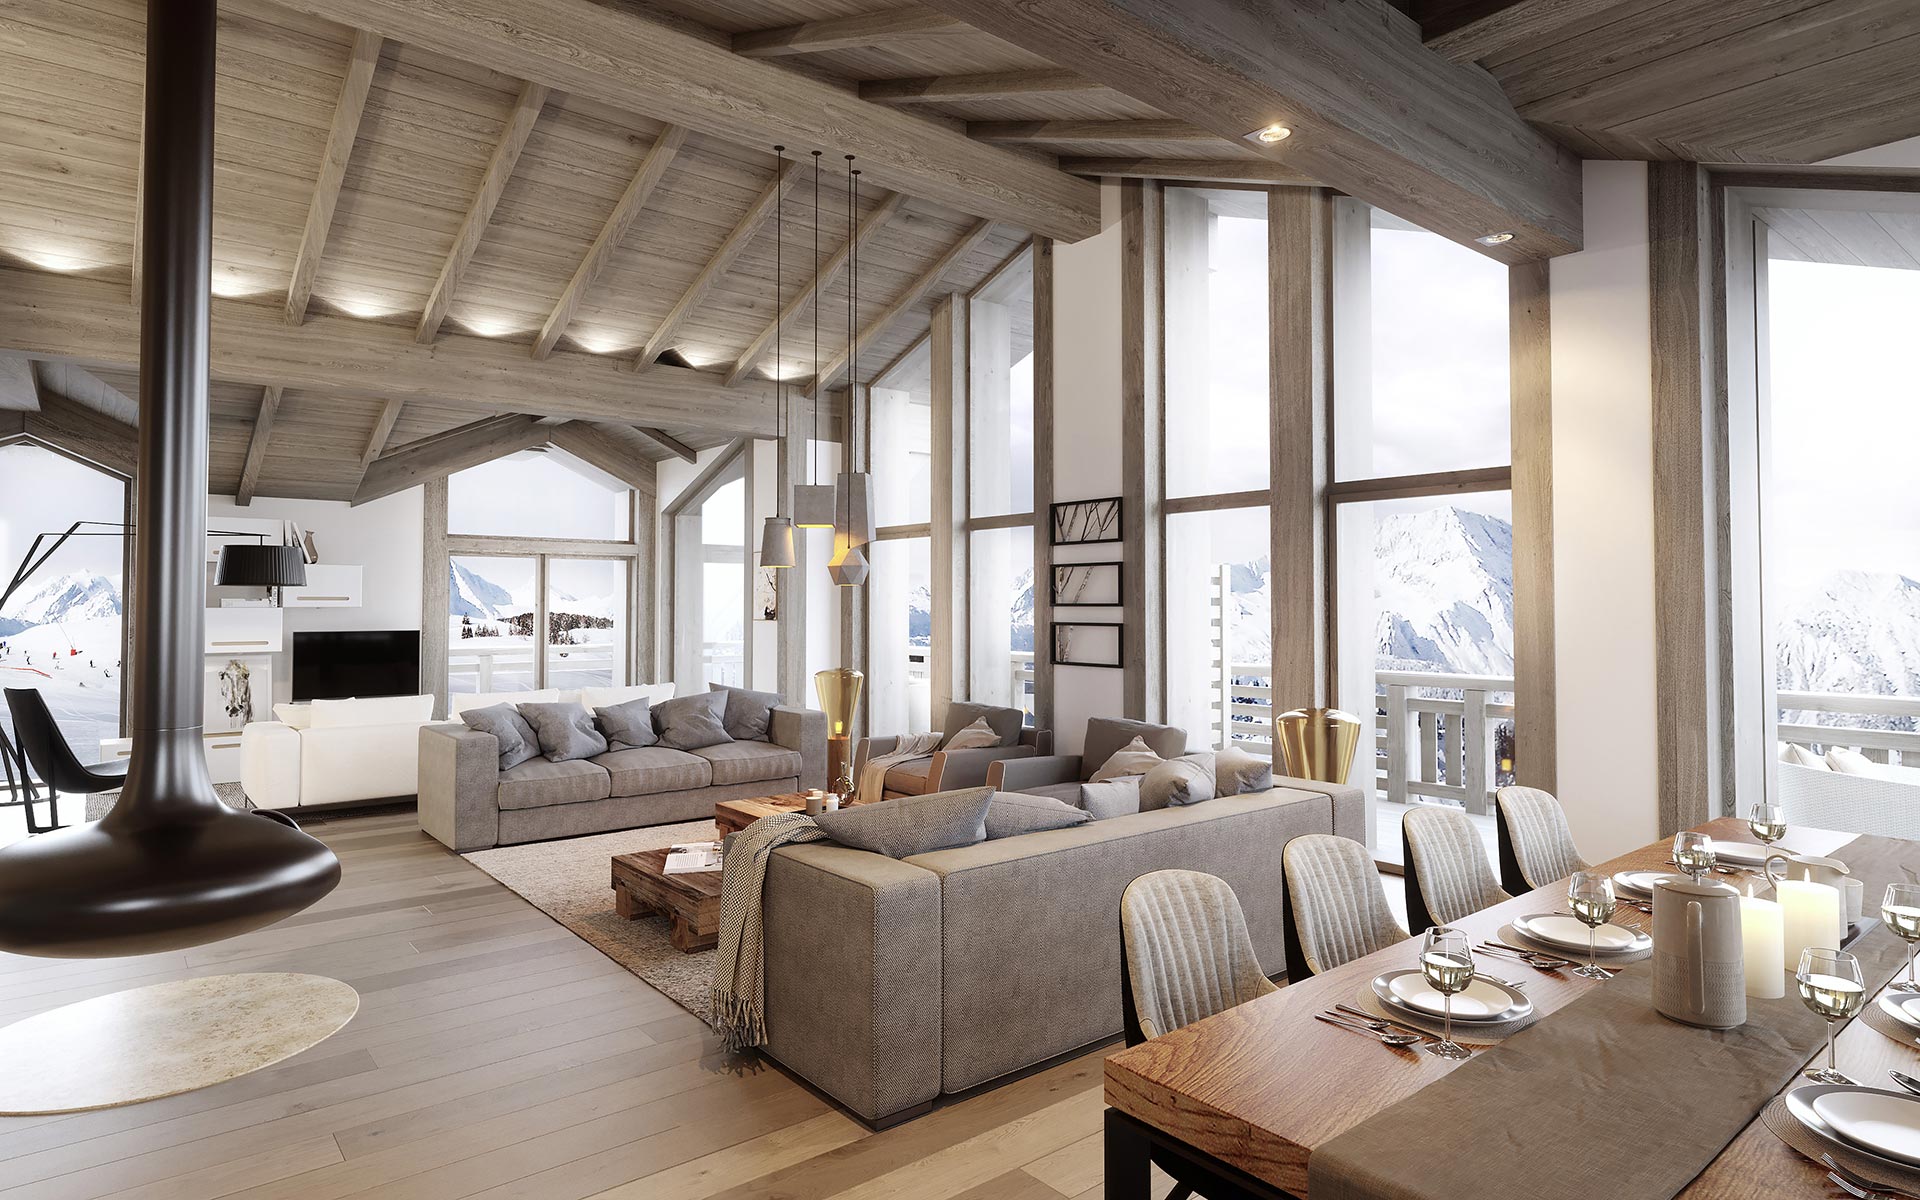 Interior perspective of a luxury chalet apartment